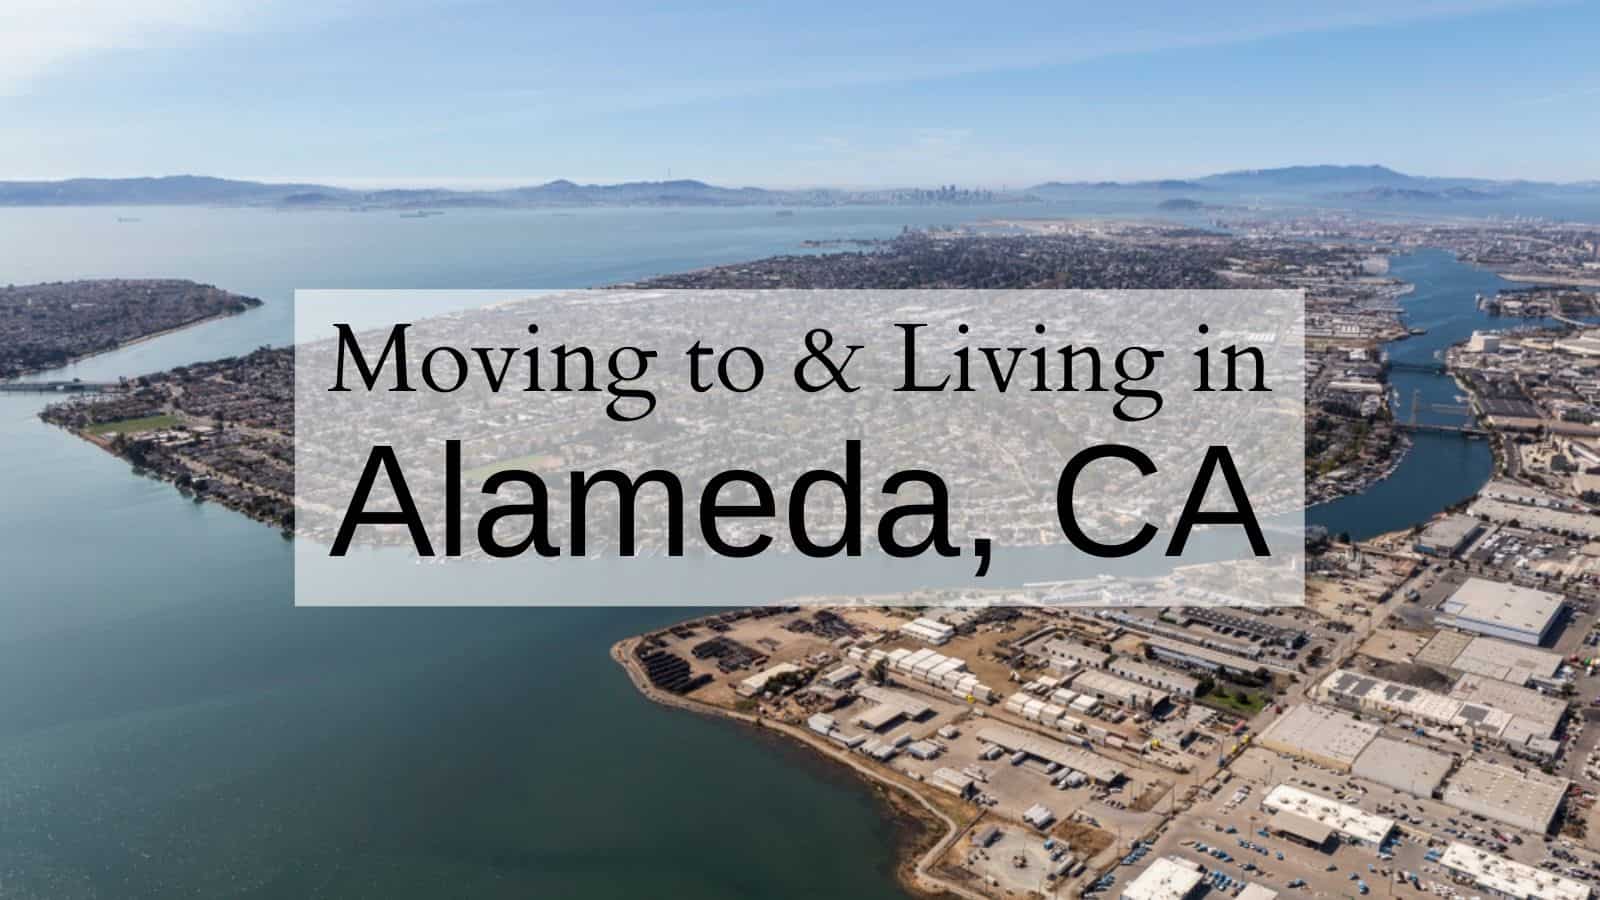 Moving to & Living in Alameda, CA